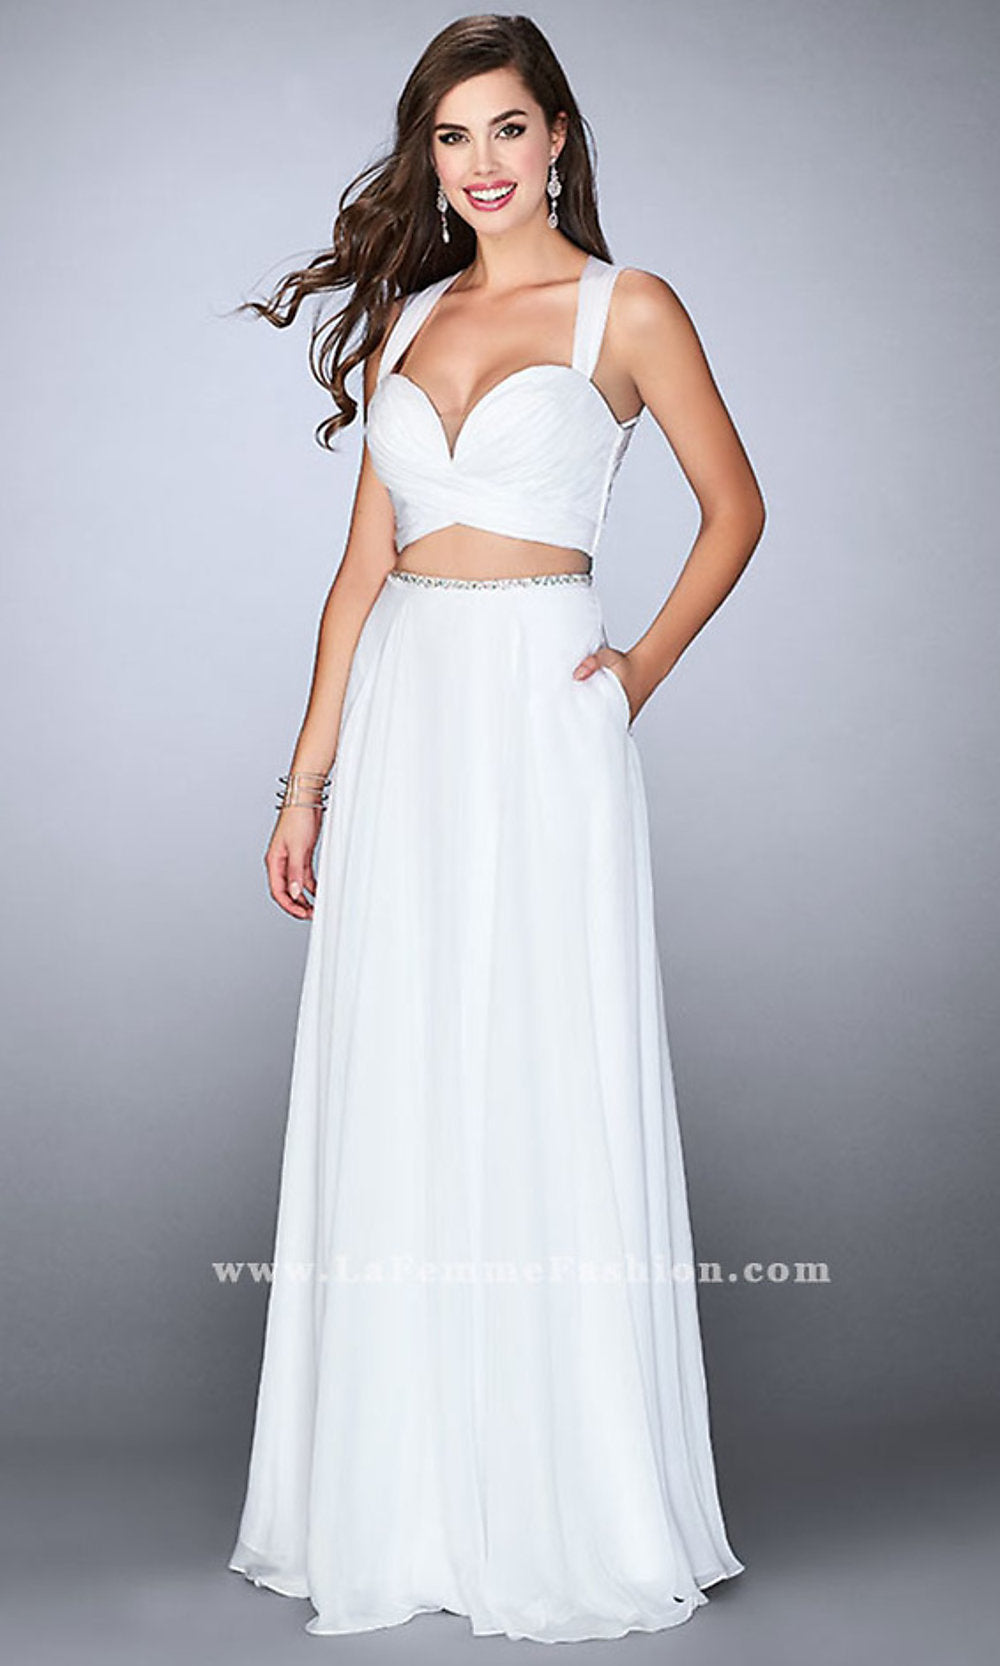 White Two Piece Prom Dress with a Sweetheart Neckline